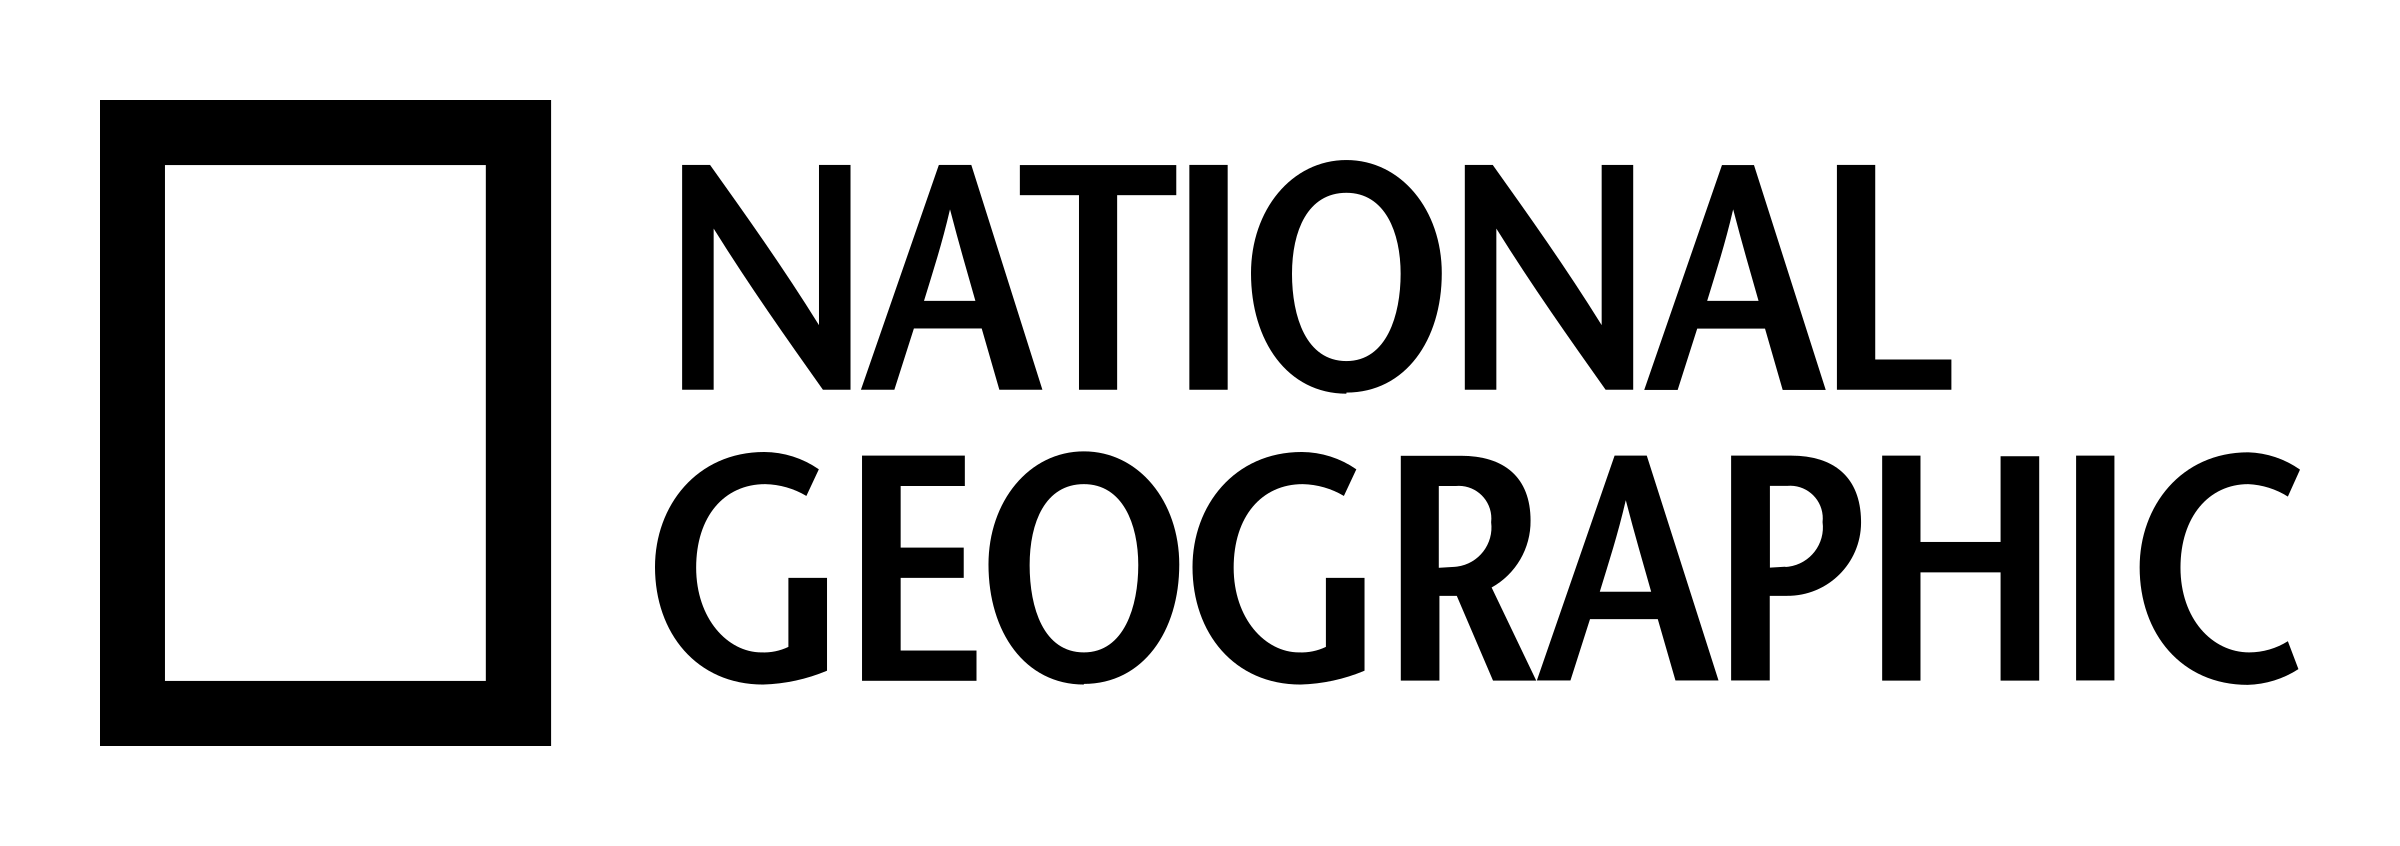 national-geographic-logo-black-and-white.png